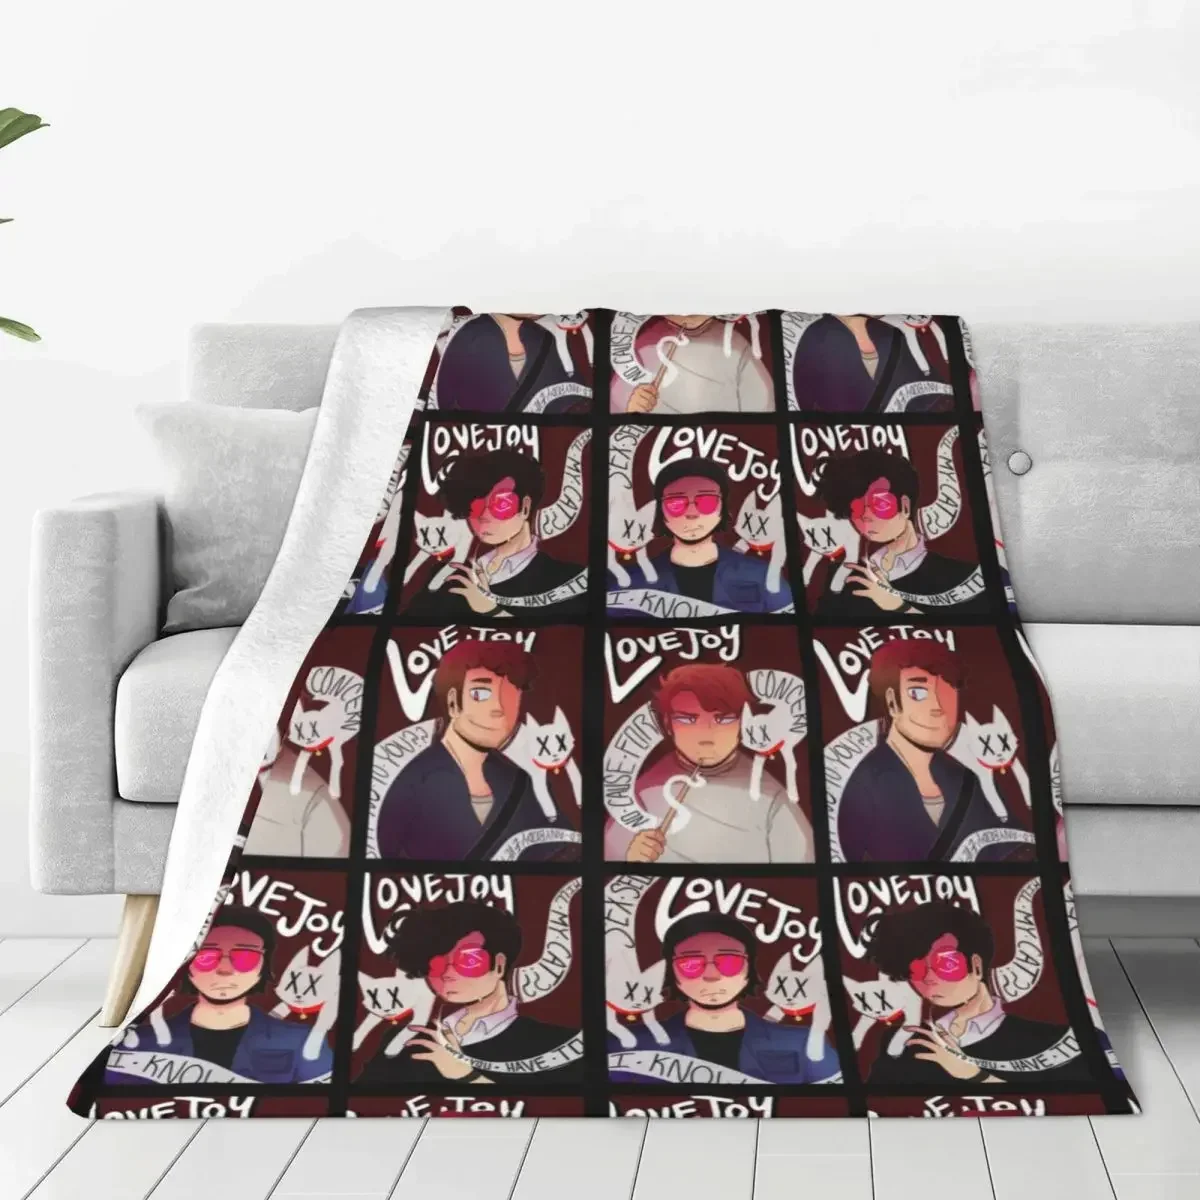 

Lovejoy Band Are You Alright Blankets Fuzzy Throw Blanket Summer Air Conditioning Portable Ultra-Soft Warm Bedspreads